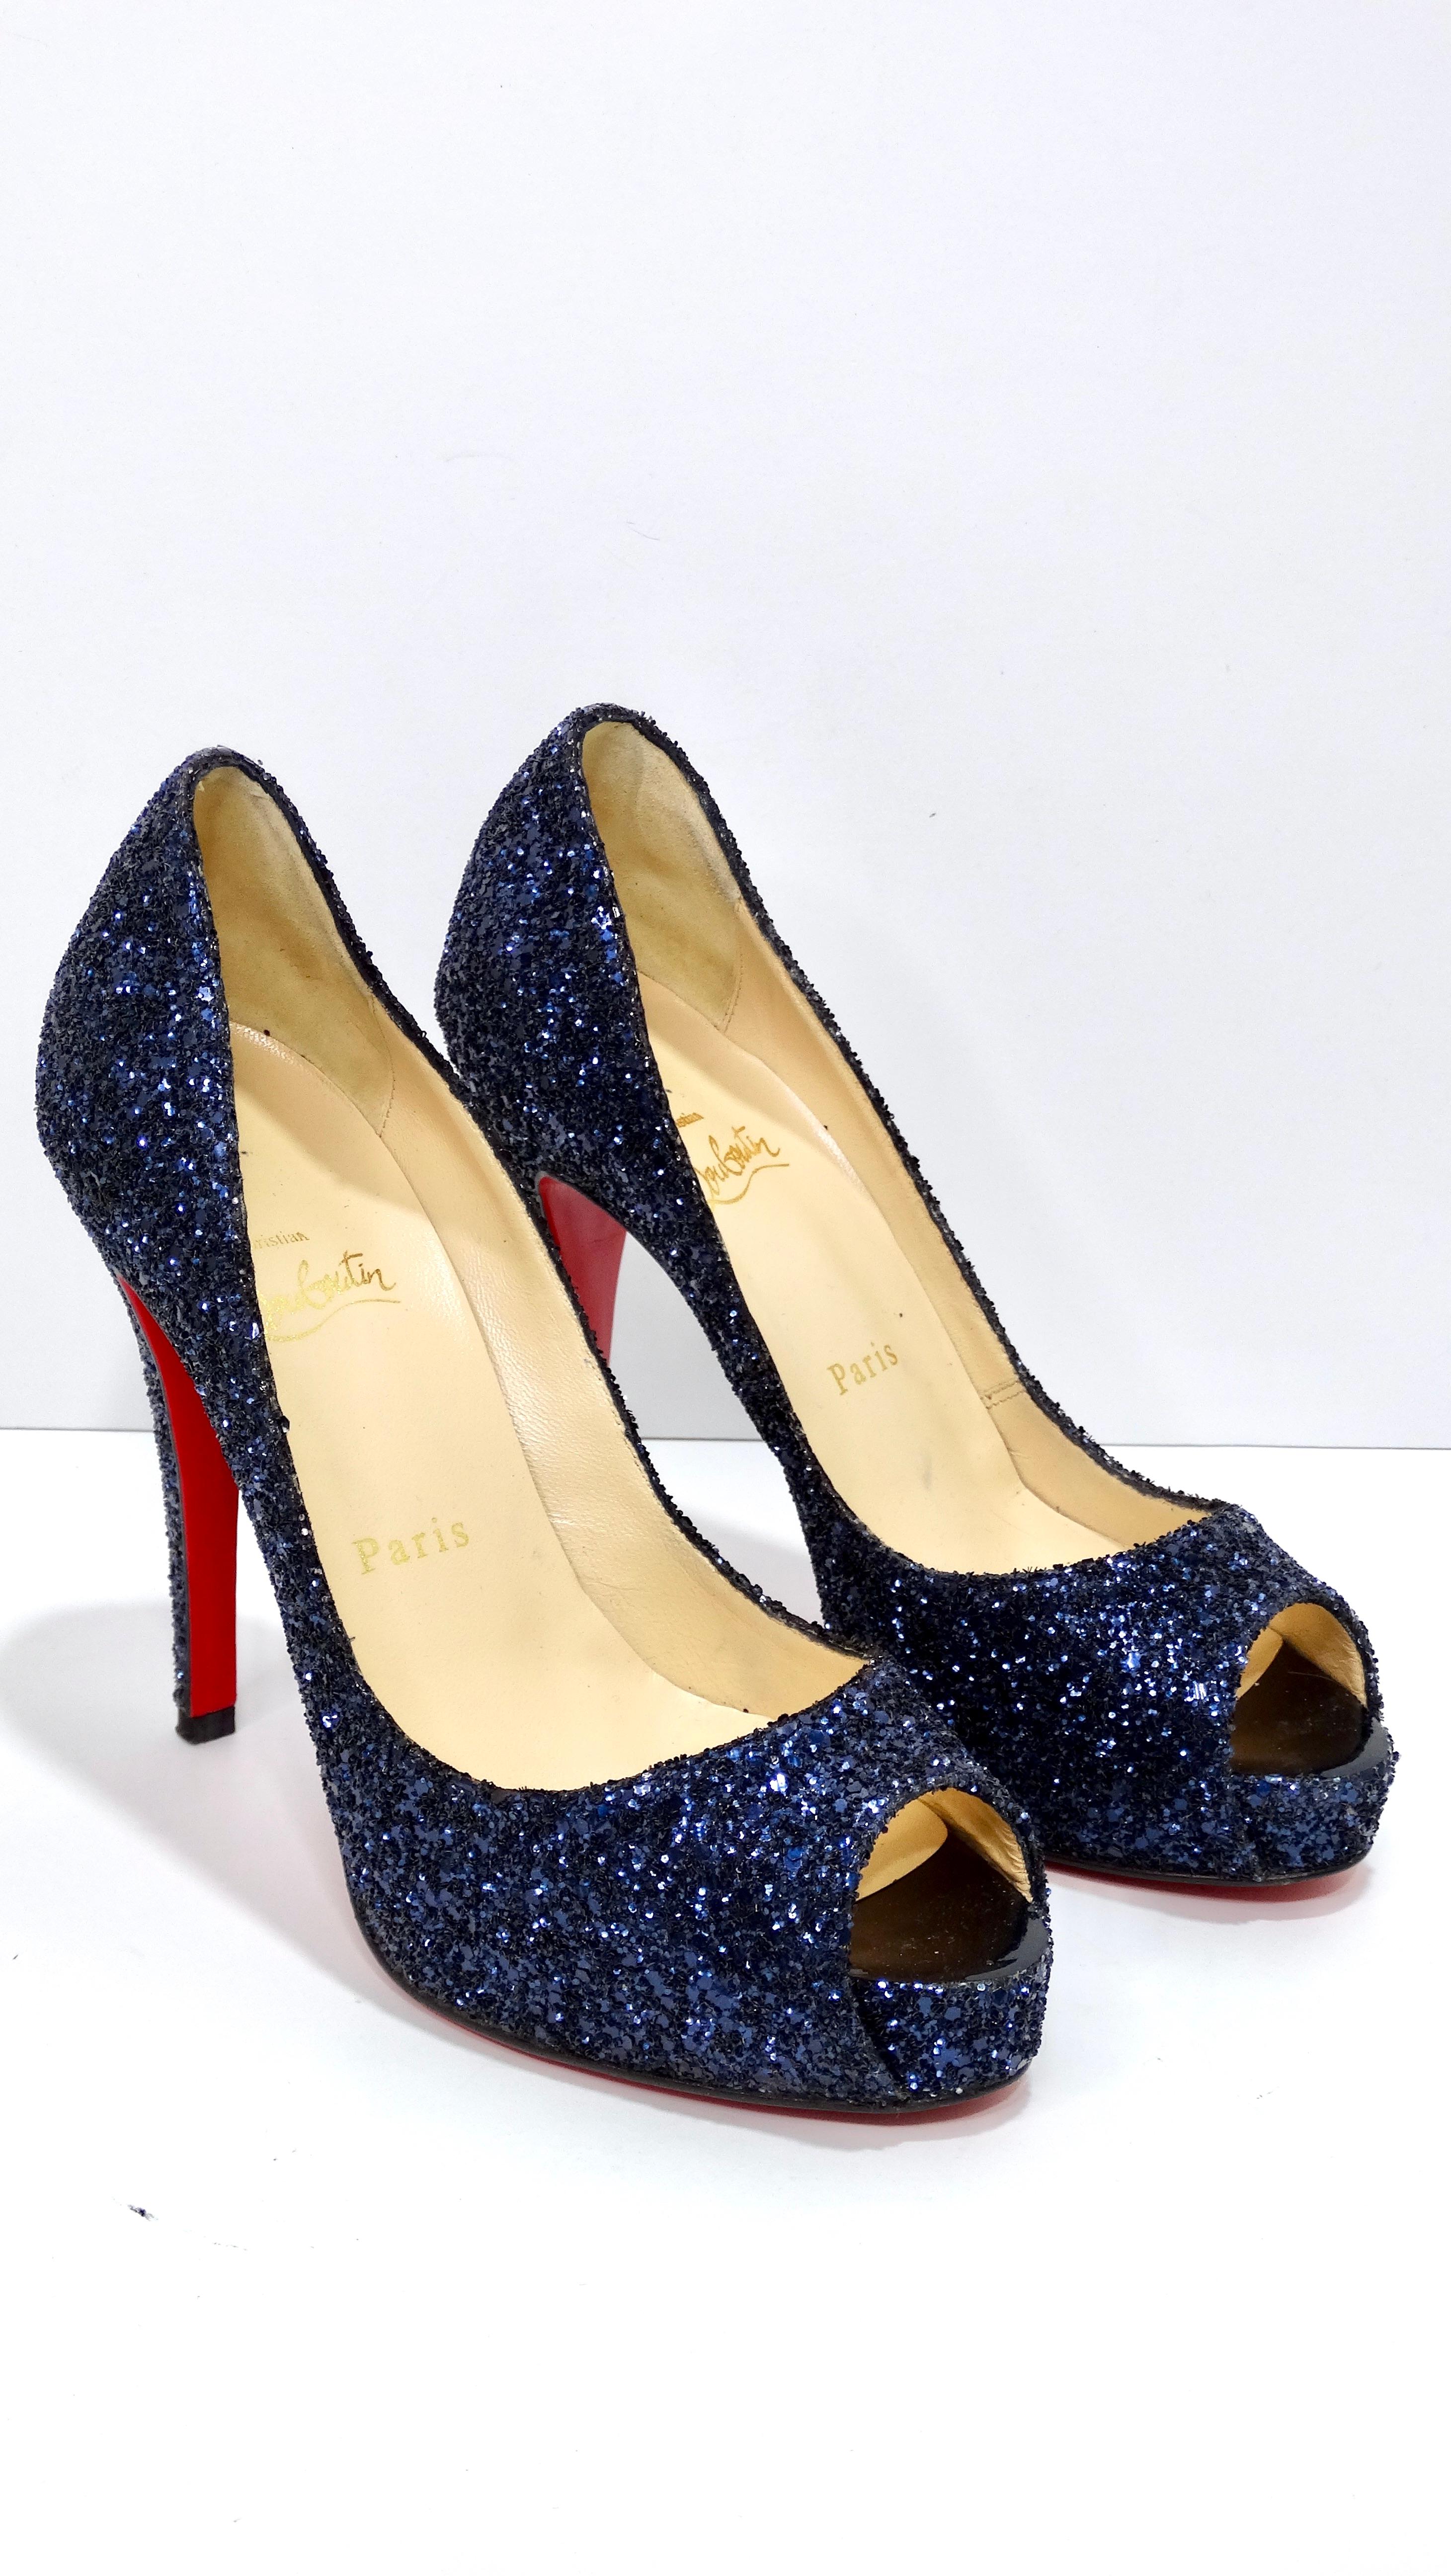 Do not tell me you don't smile when you see these Christian Louboutins fully decked out in glitter! These will give you an instant mood boost as well as making you feel your most confident before a night out you've put off for too long. These